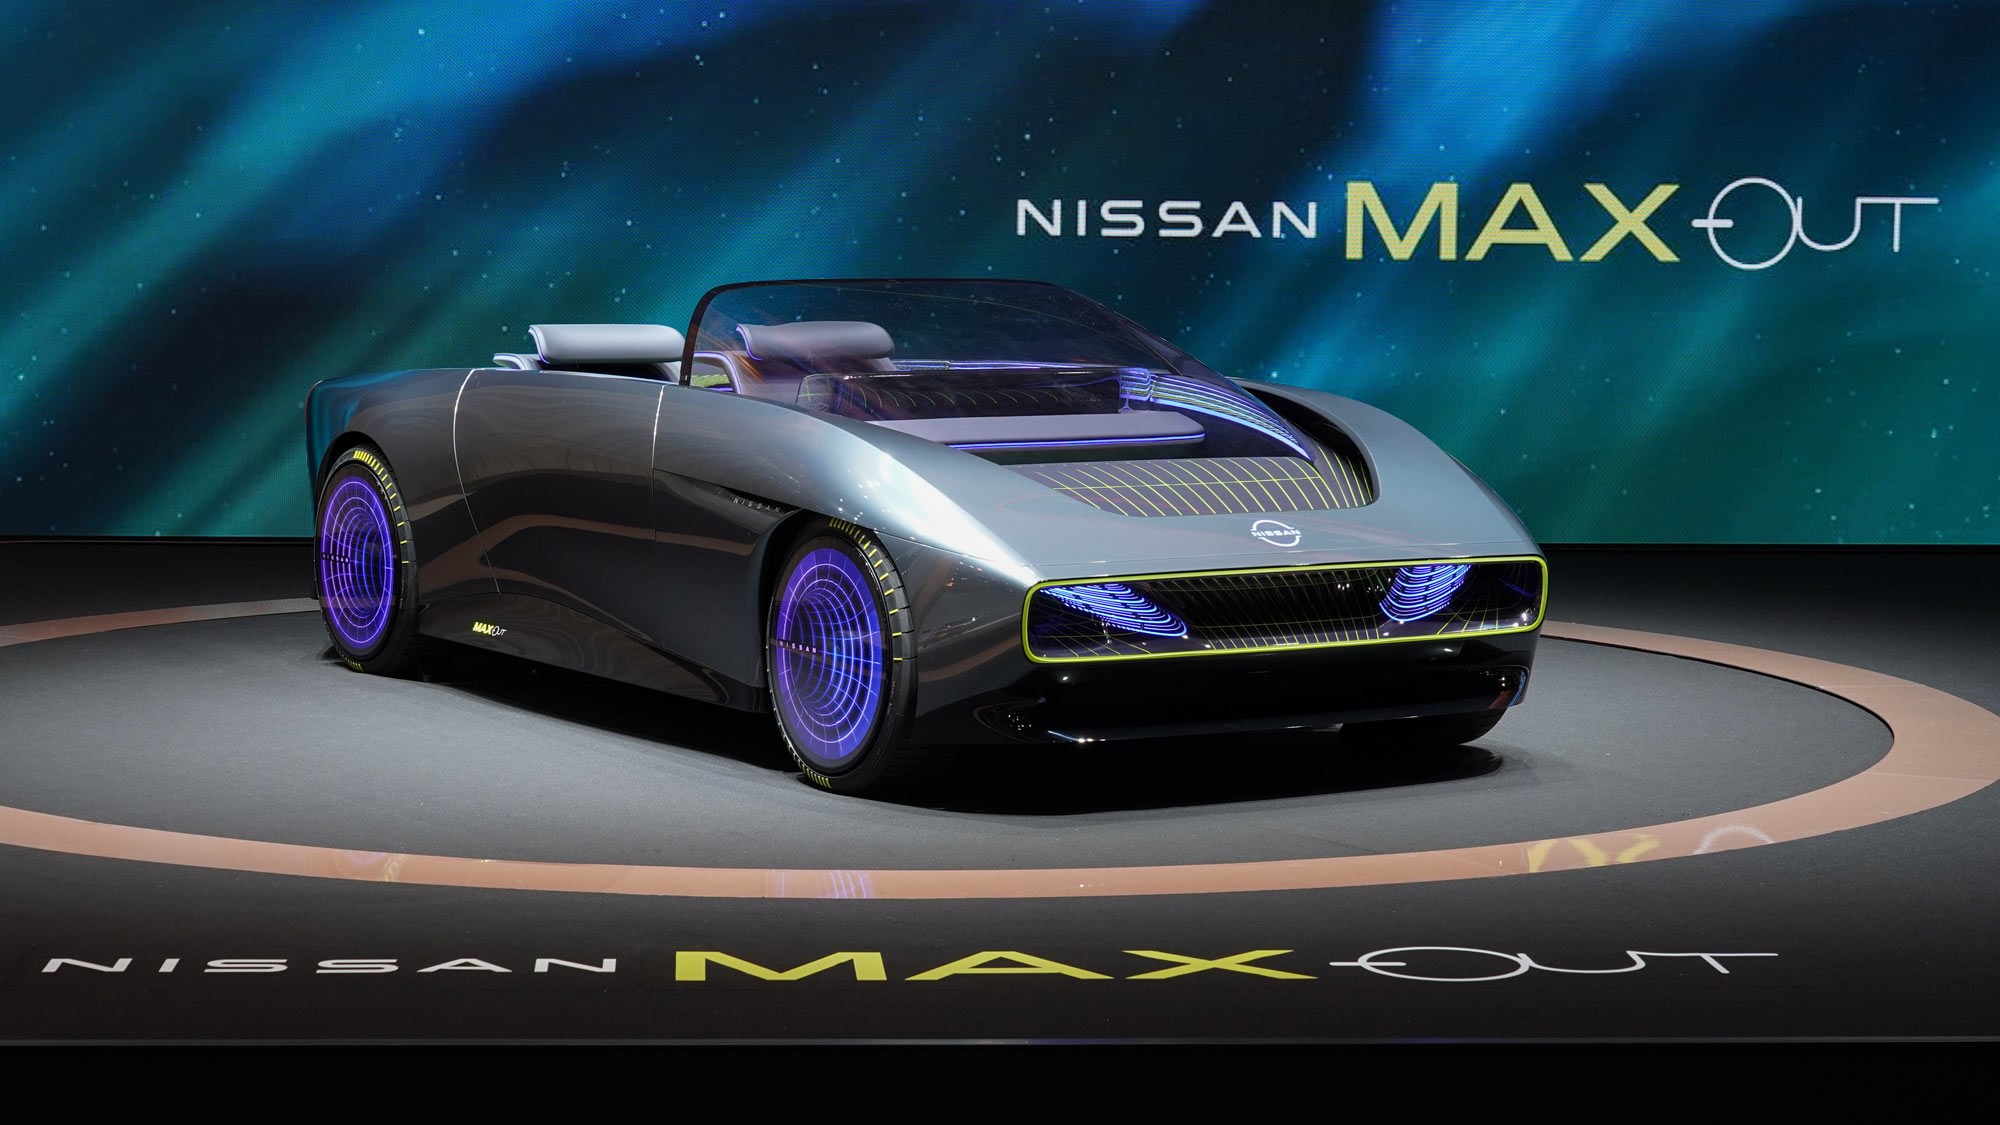 2021 Nissan Max Out Concept